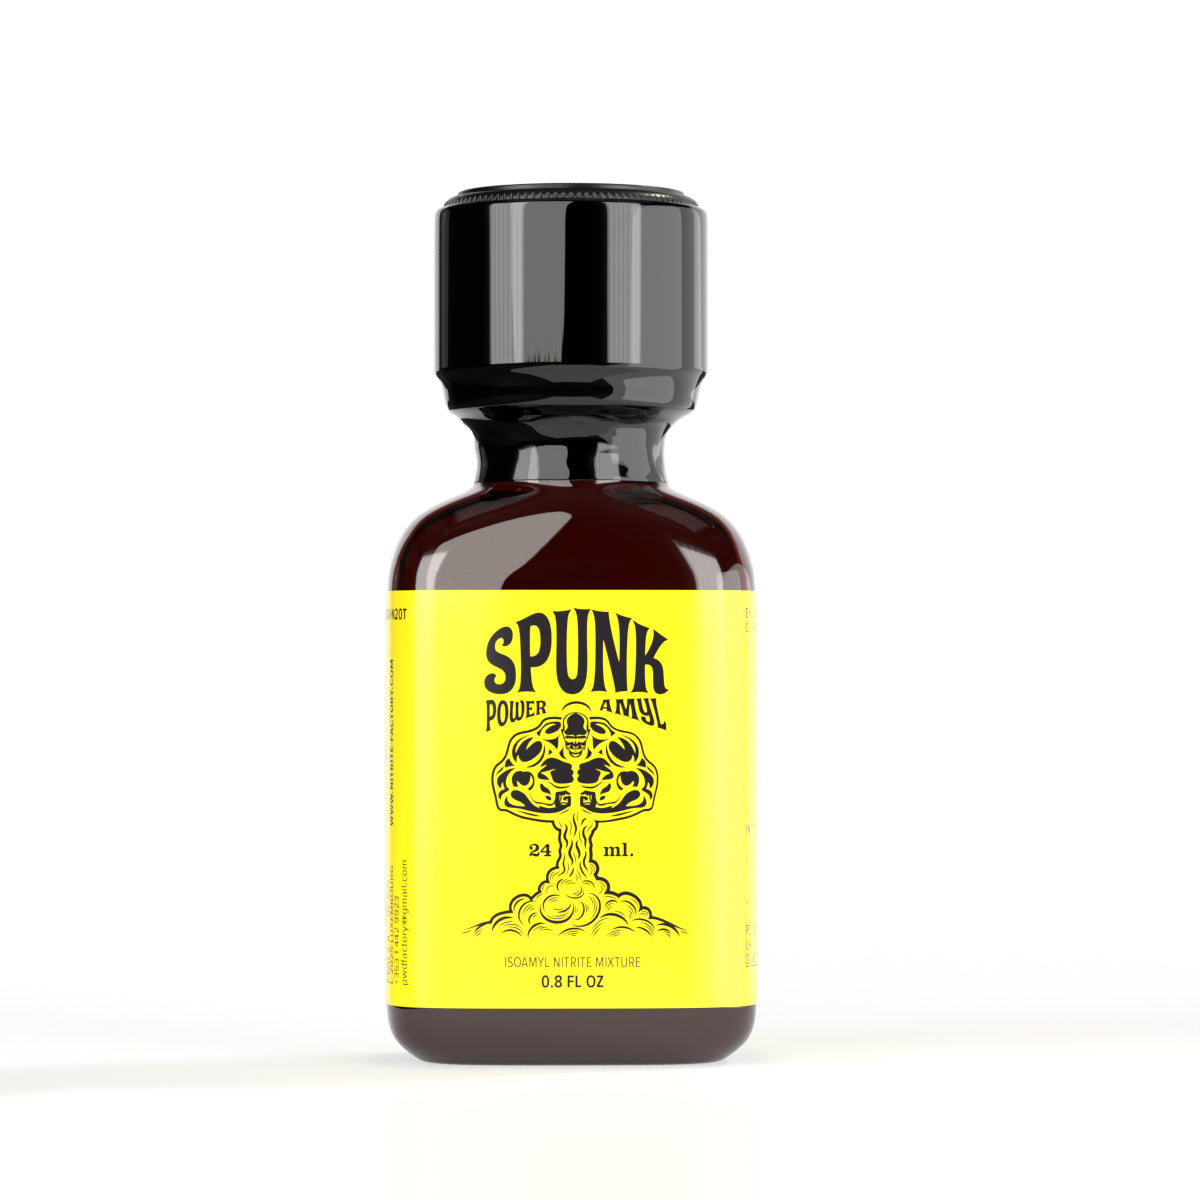 A product photo of a bottle of Spunk Poppers.